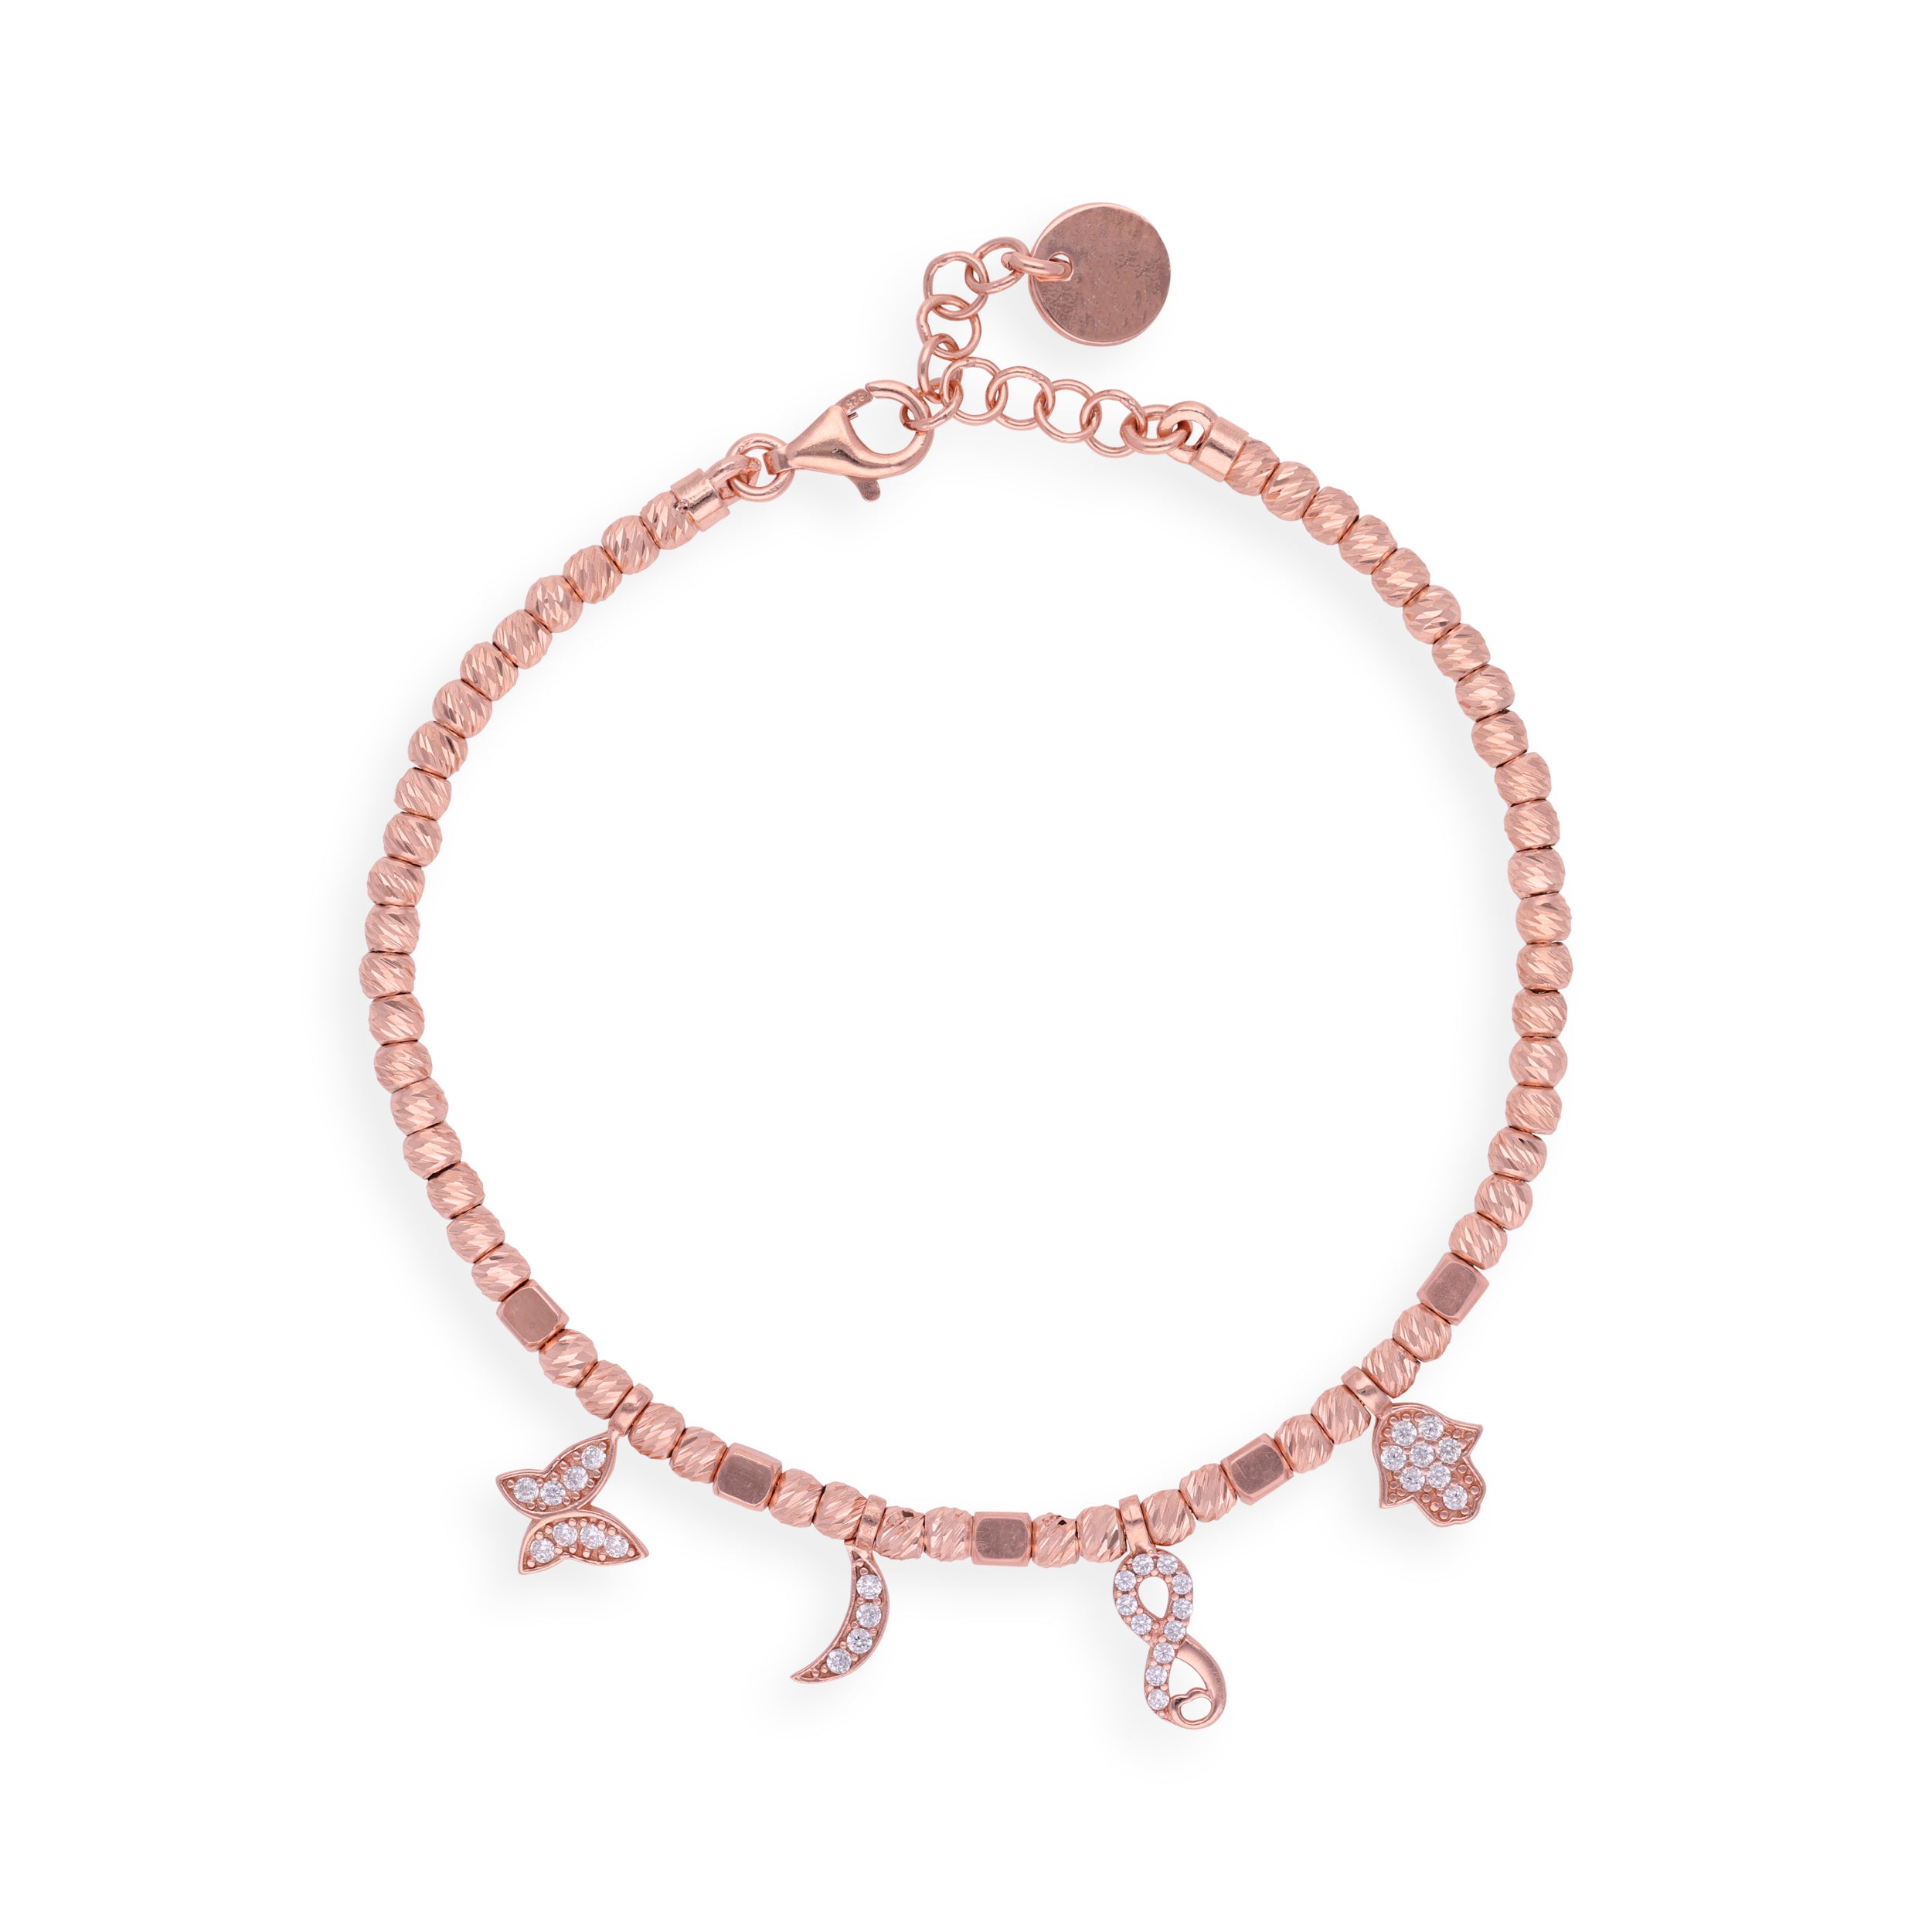 Rose Gold Chain Bracelet with Fancy Design and Cubic Zirconia | SKU : 0003109991, 0003109977, 0003109984, 0003110003